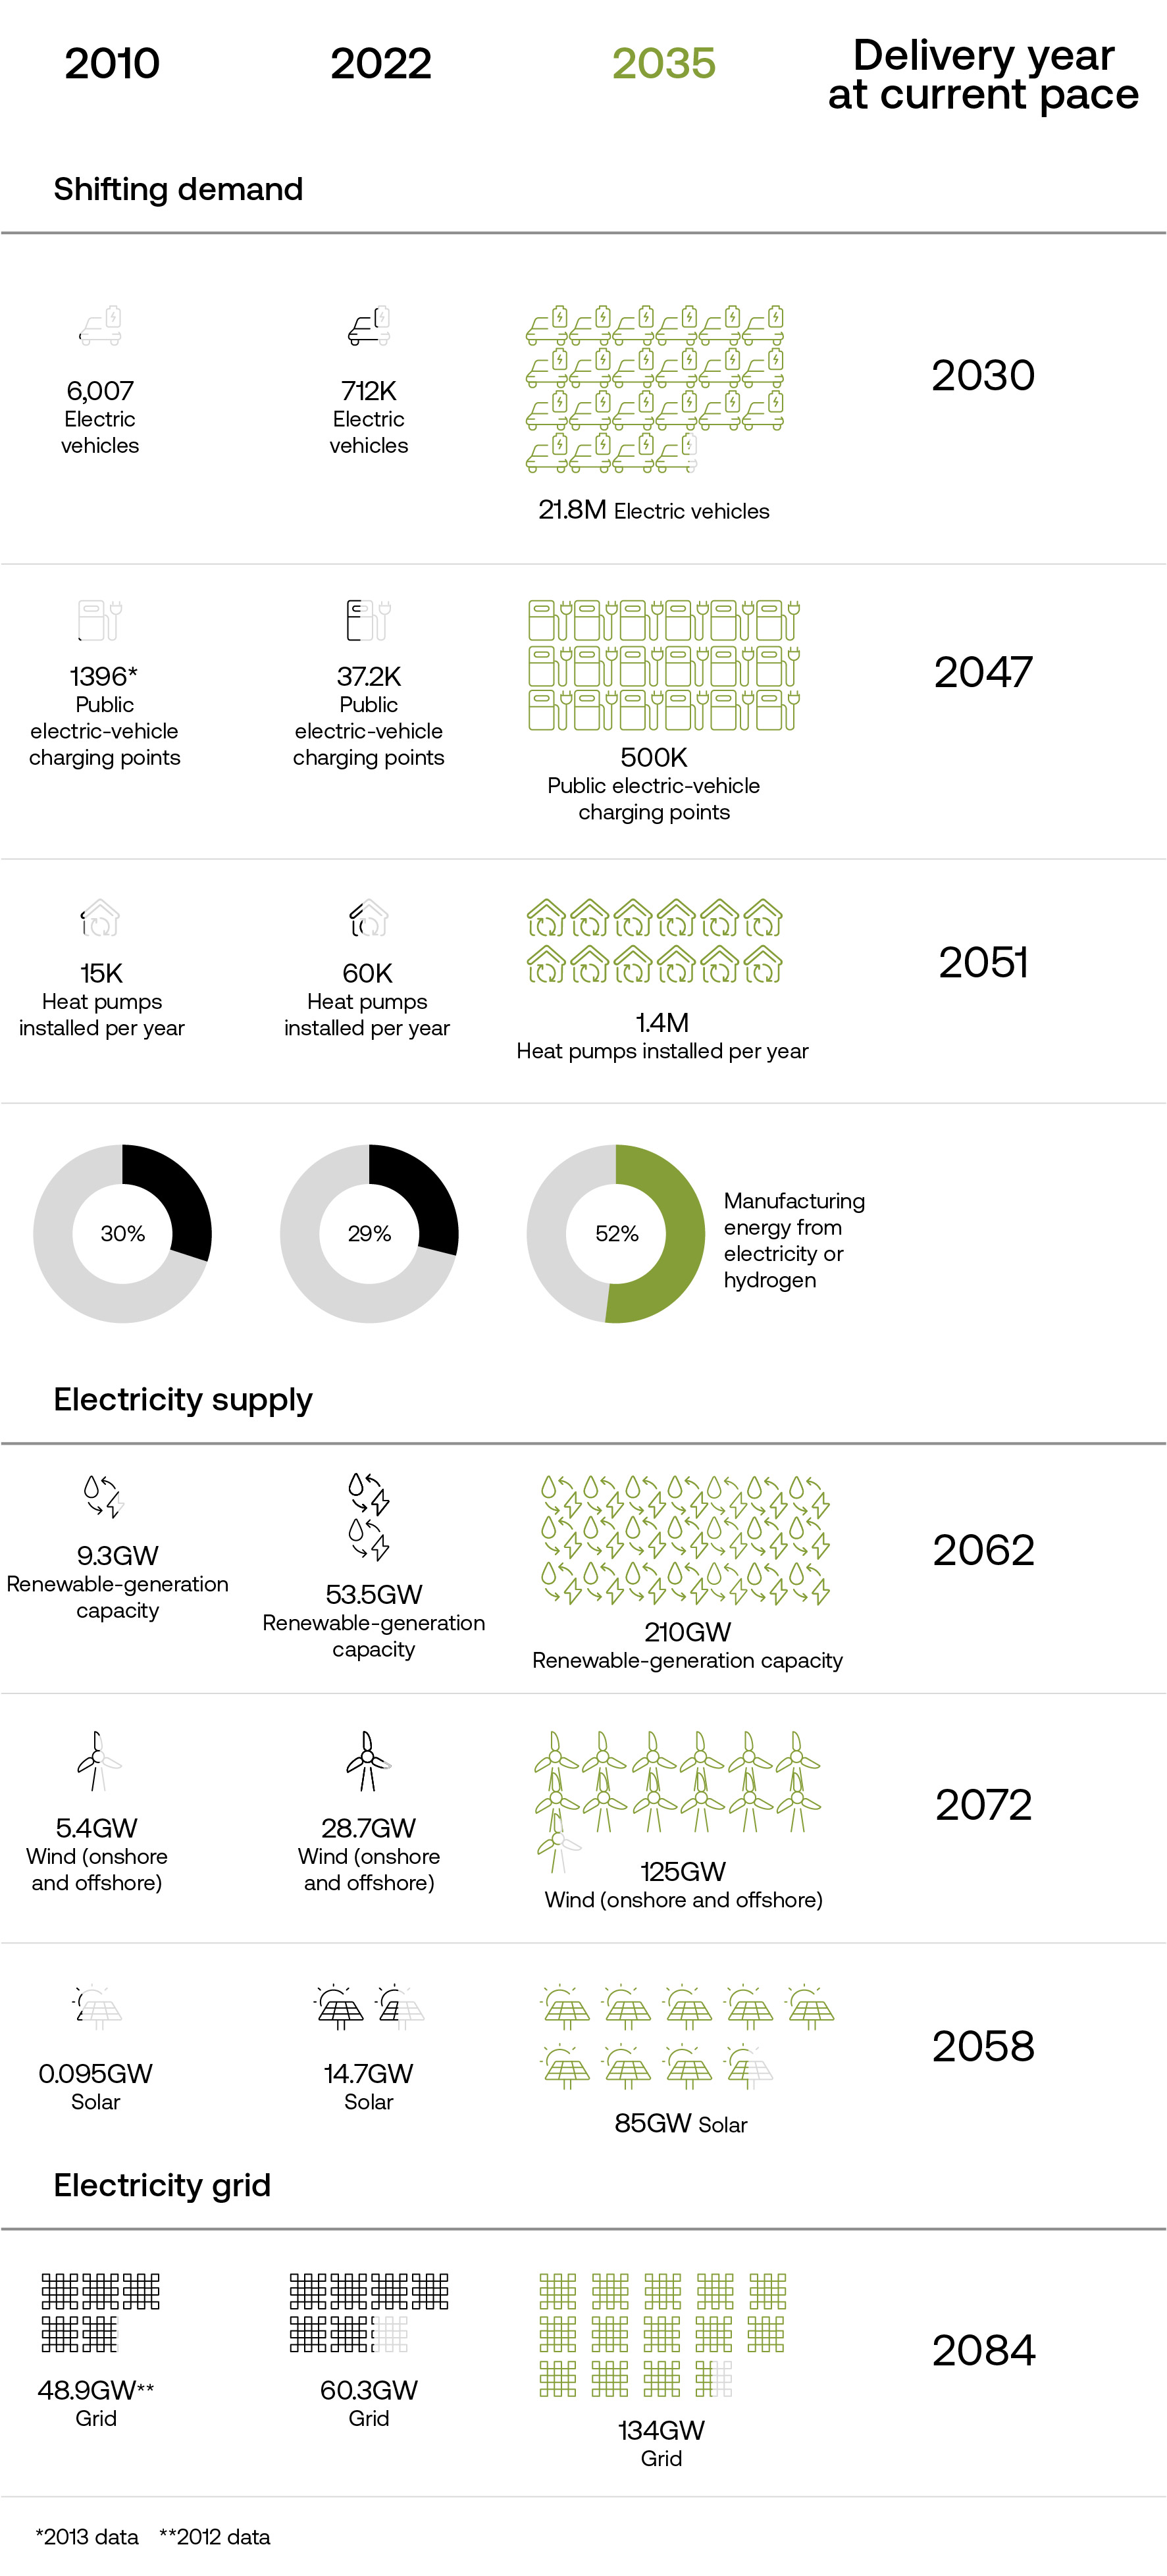 Progress in electrification from 2010 to 2022 and targets for 2035